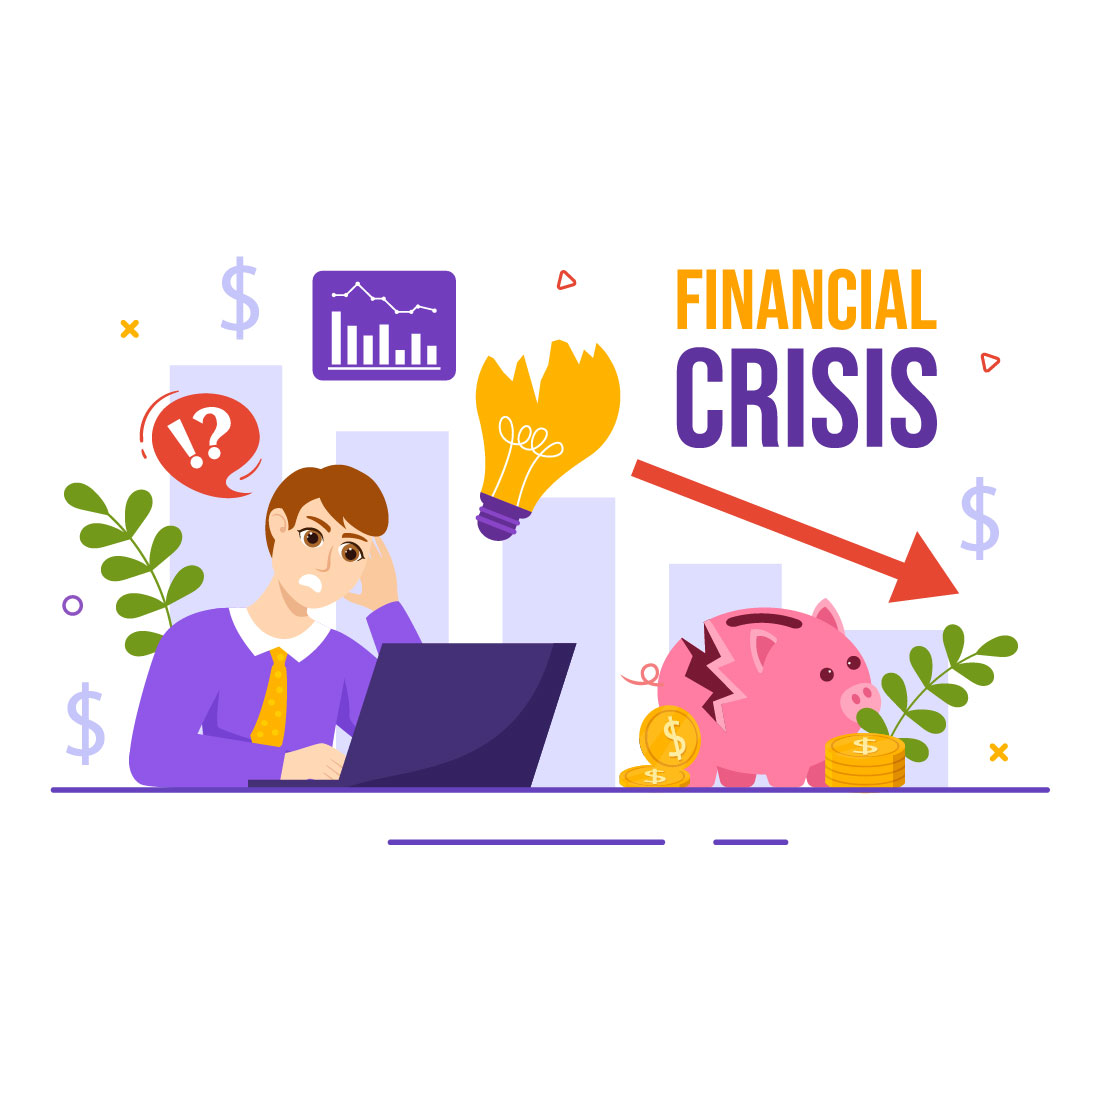 14 Financial Crisis Illustration cover image.